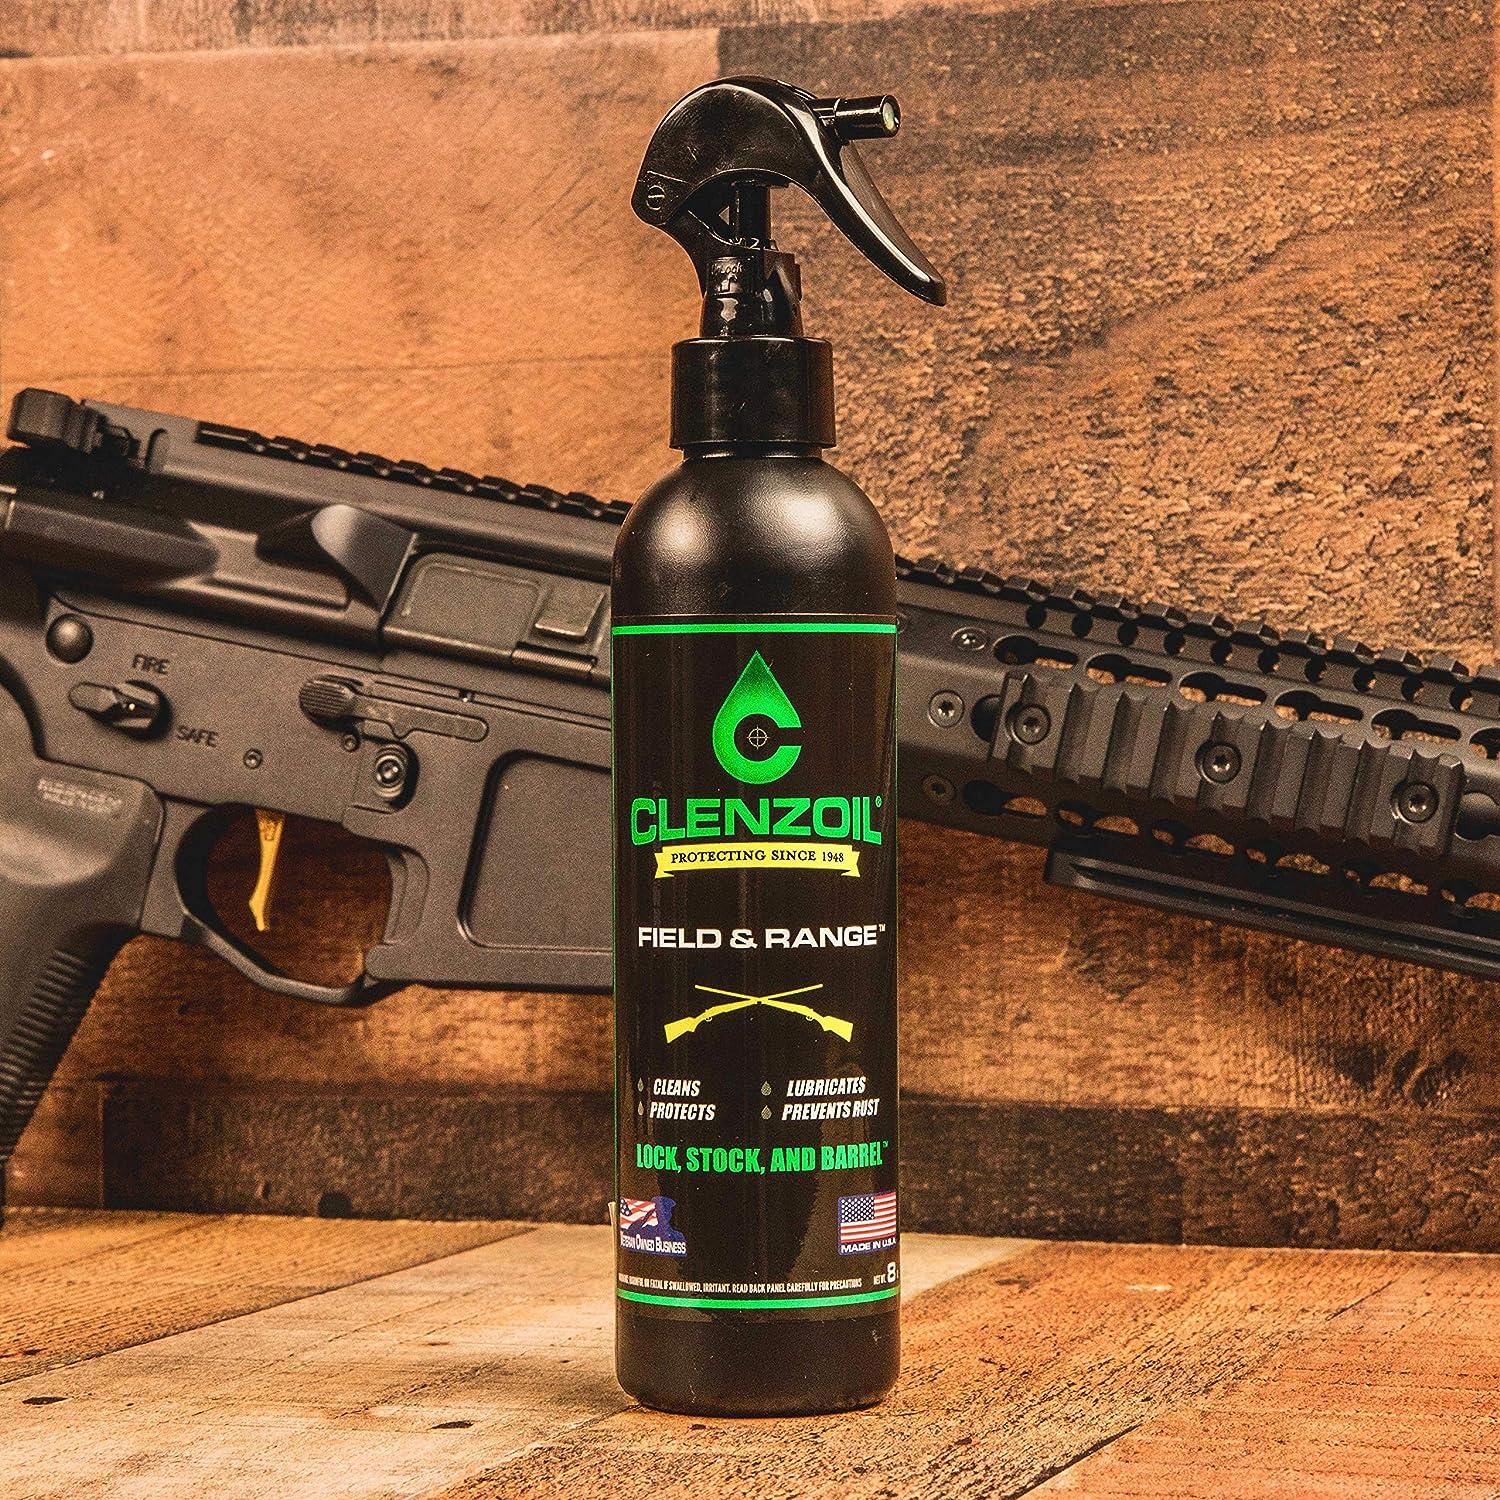 Clenzoil Field & Range Gun Oil Spray Lube, Cleaner Lubricant Protectant  CLP, Multi-Purpose Gun Cleaner and 3 in 1 Oil Lubricant